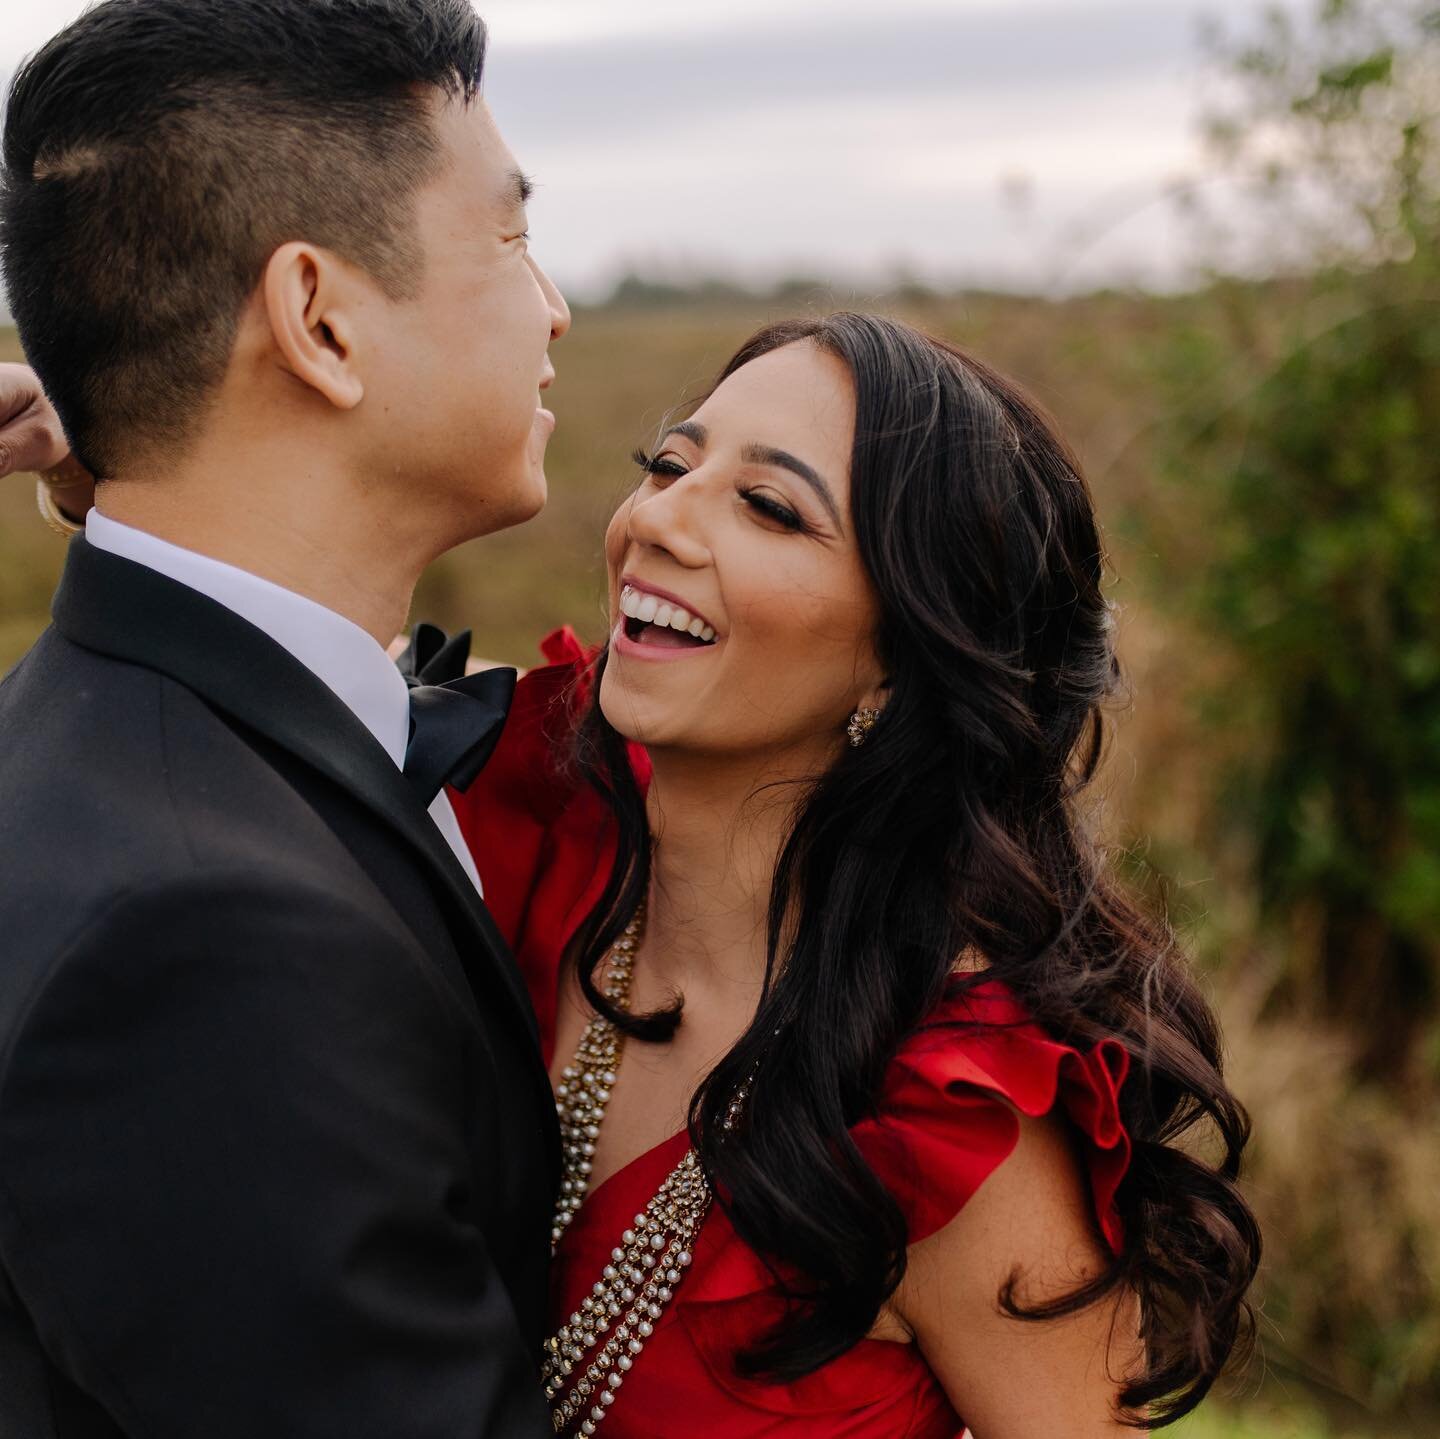 &ldquo;It&rsquo;s a connection we can&rsquo;t explain&rdquo; 

Makeup &amp; Hair: @nalinimaharaj 
Photography: @mathiasfast 

✨For bookings and inquiries please email info@nalinimaharaj.com or text 604-727-0285 ✨⠀

#brideandgroom #love #everlastinglo